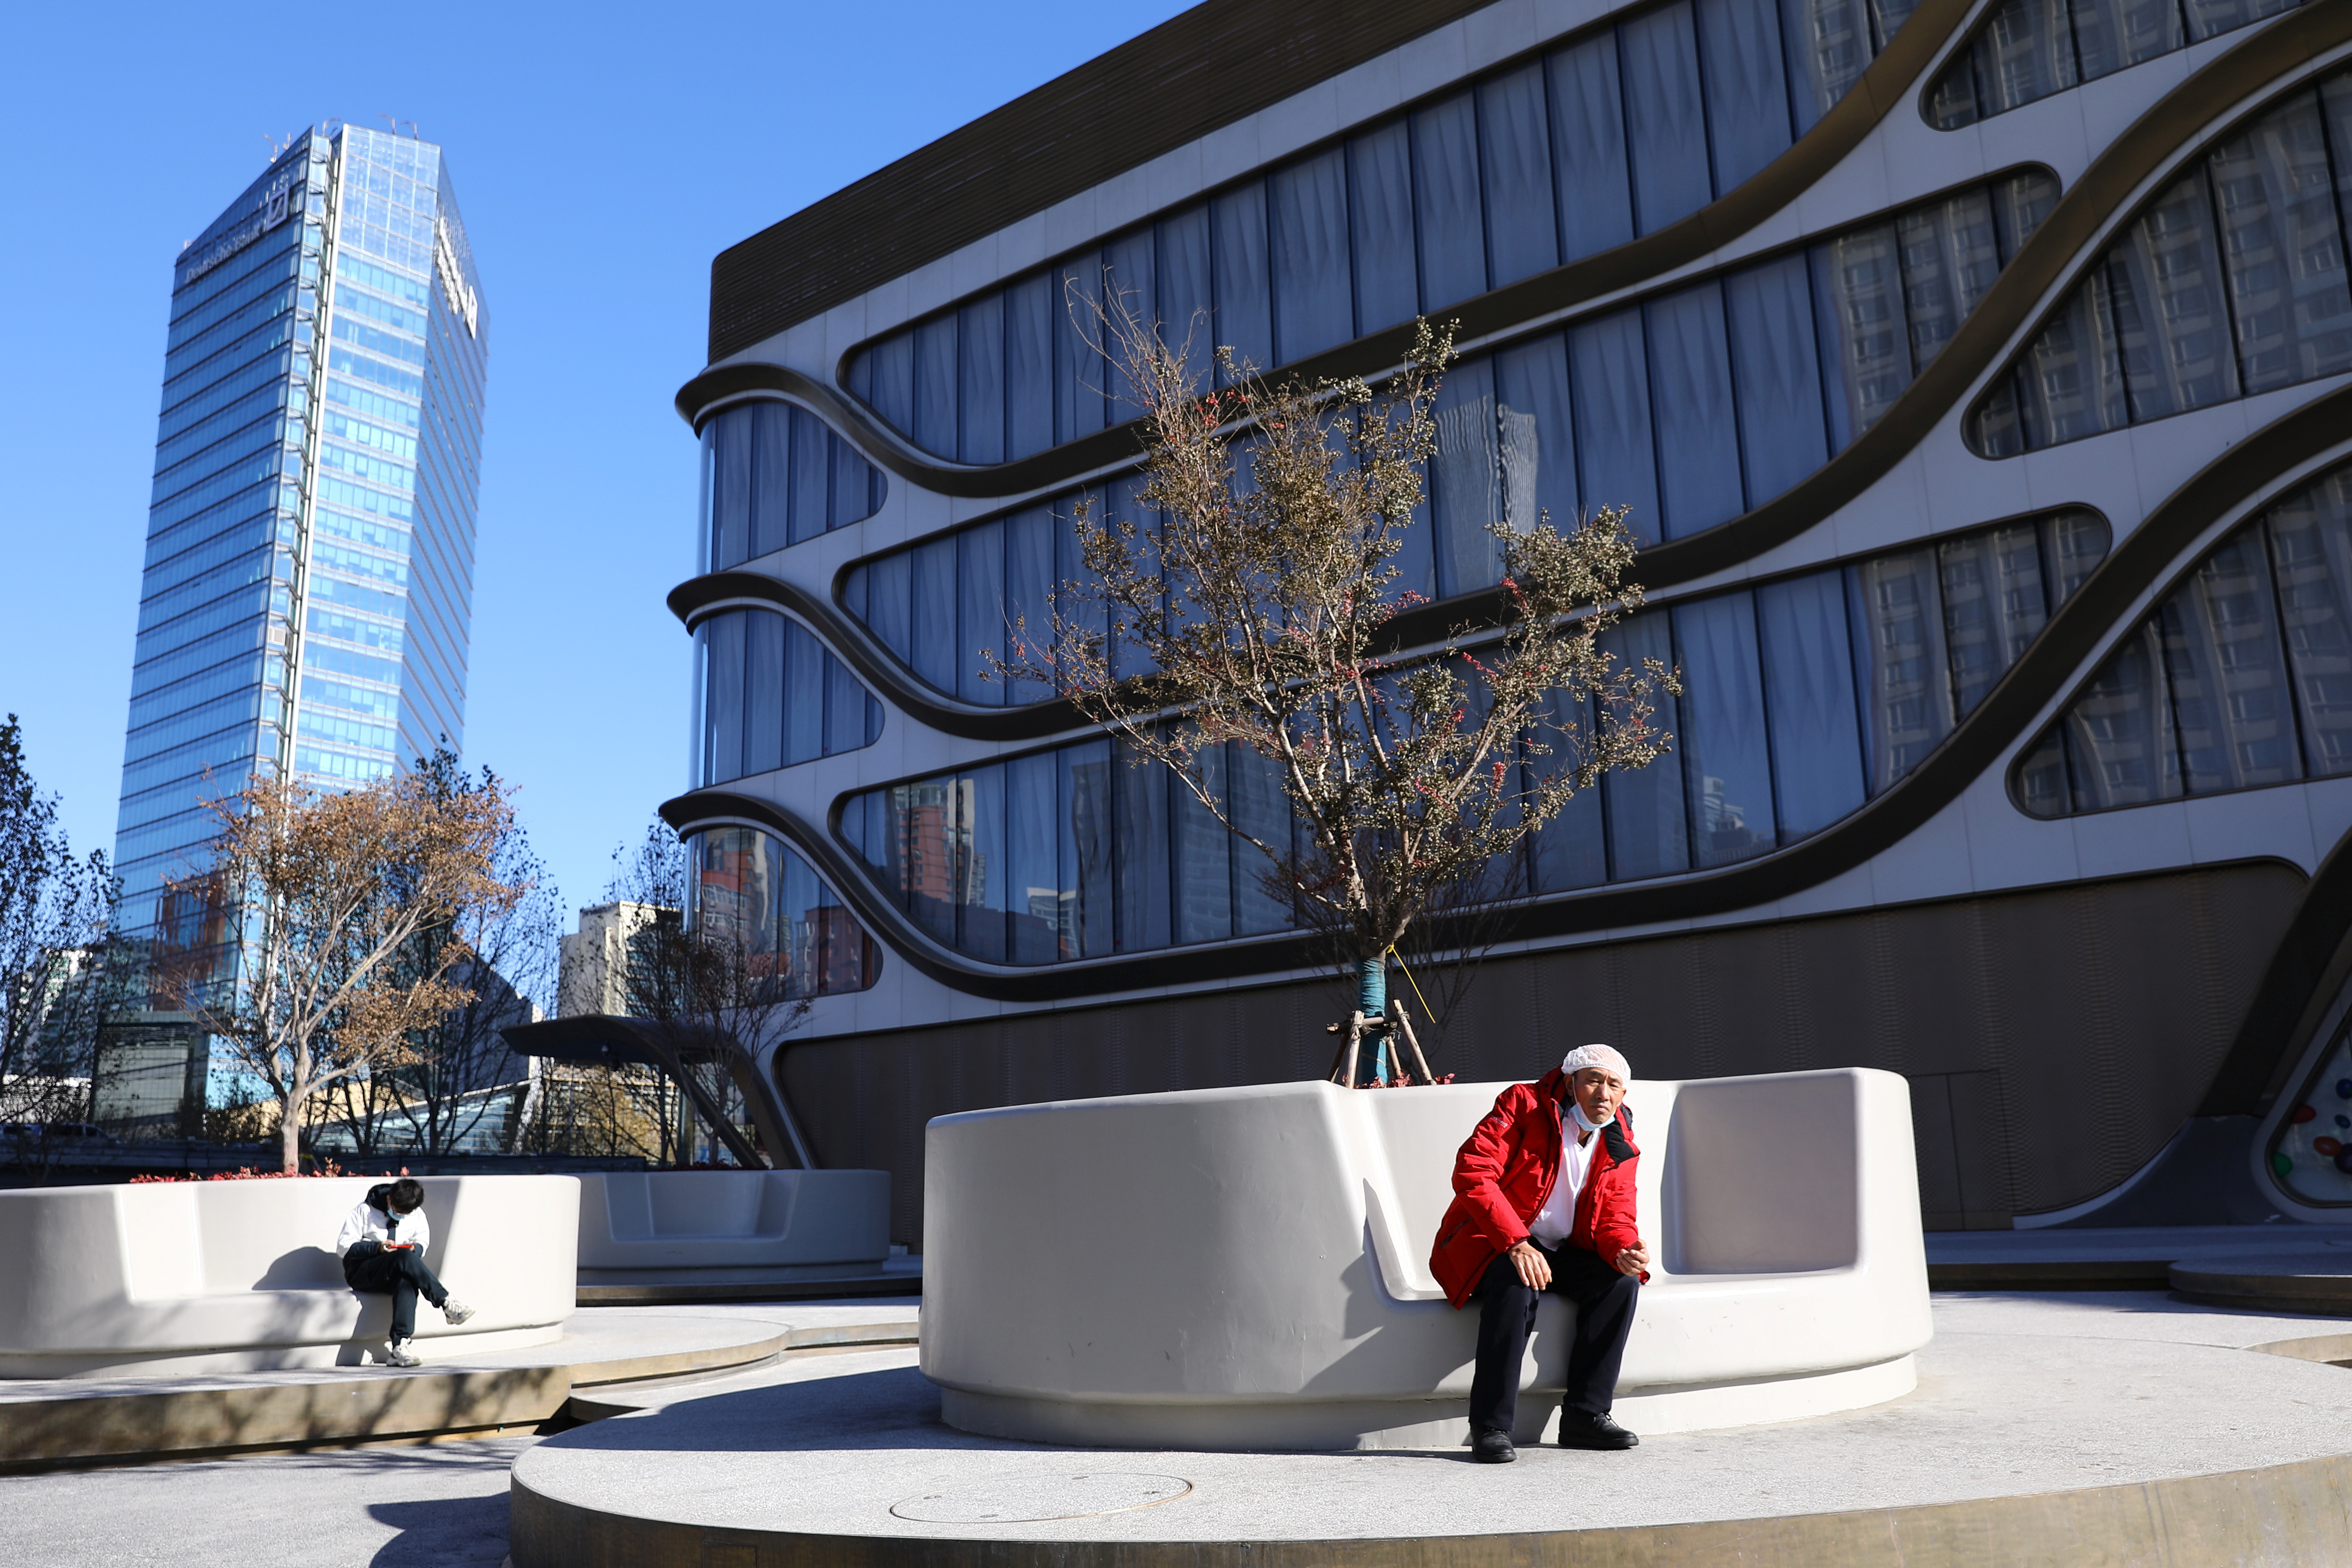 A man rests in front of a shopping mall at the Kaisa Plaza, a real estate property developed by Kaisa Group Holdings, in Beijing, China December 1, 2021. REUTERS/Tingshu Wang